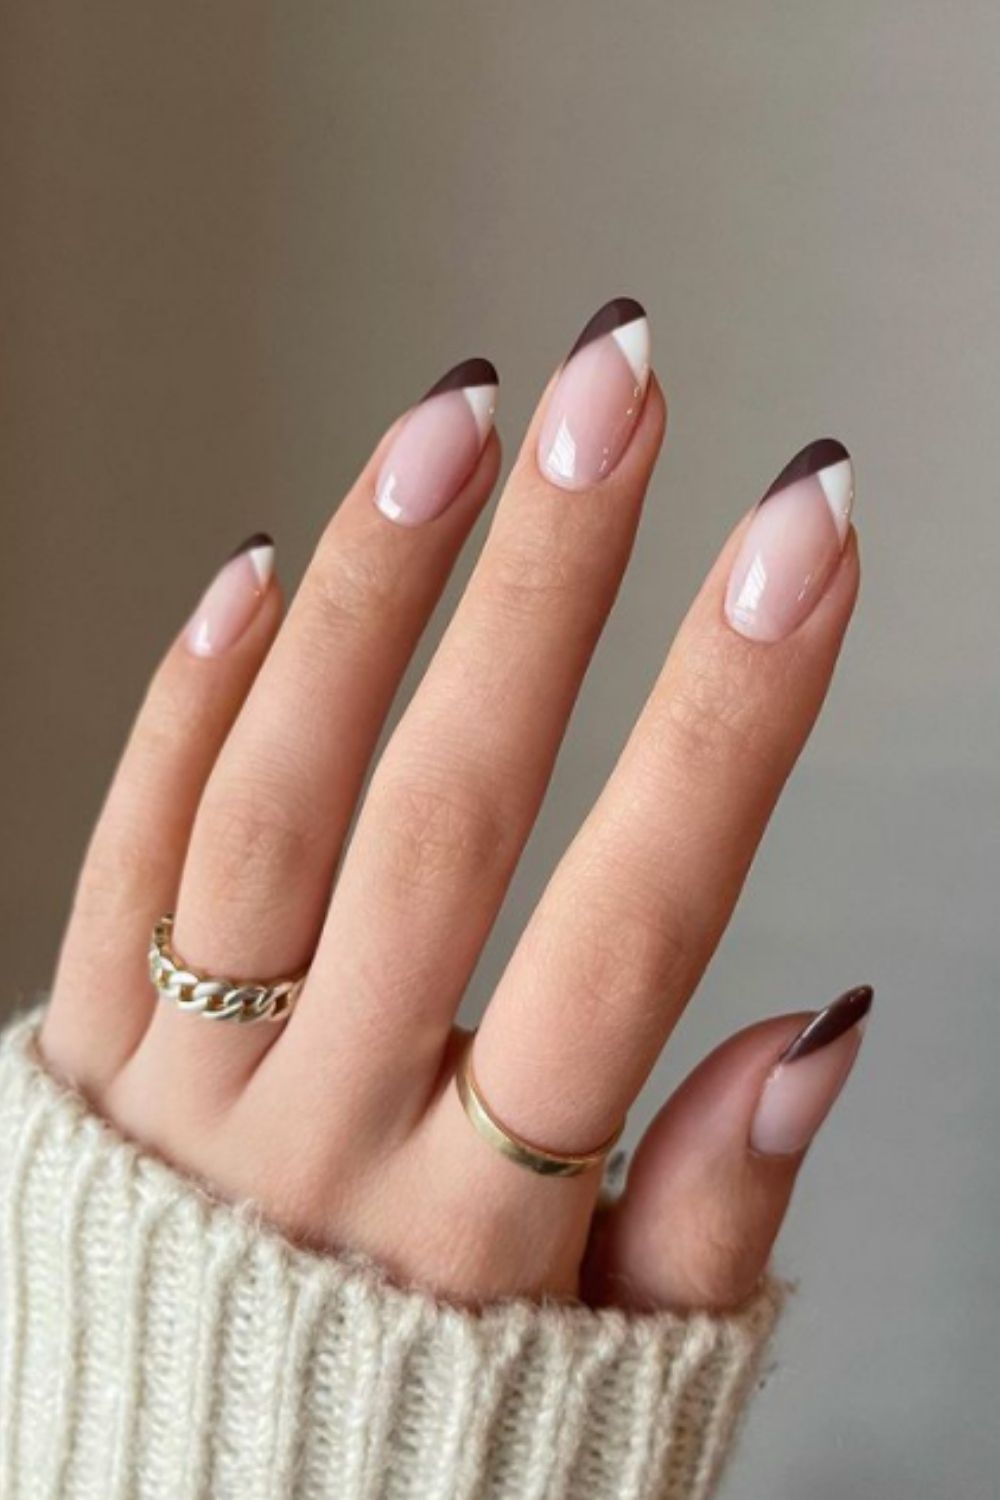 Nails for Fall 2021